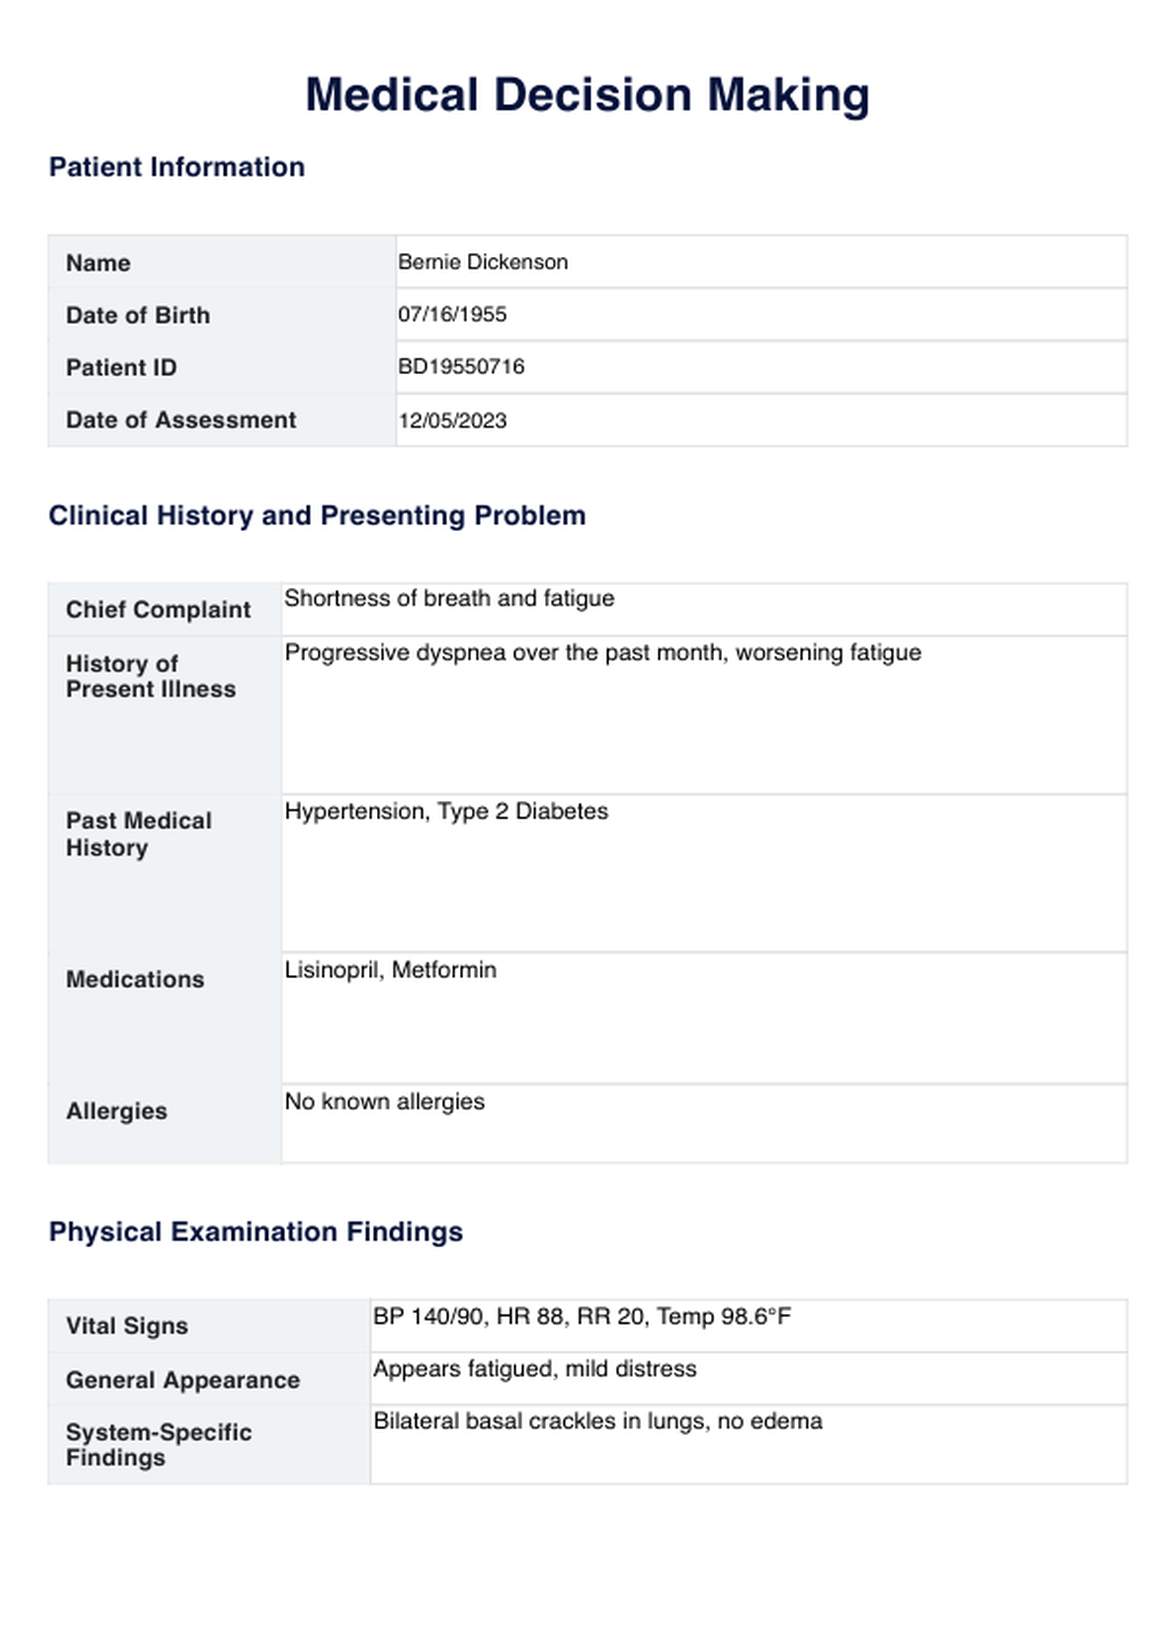 Medical Decision Making Template PDF Example